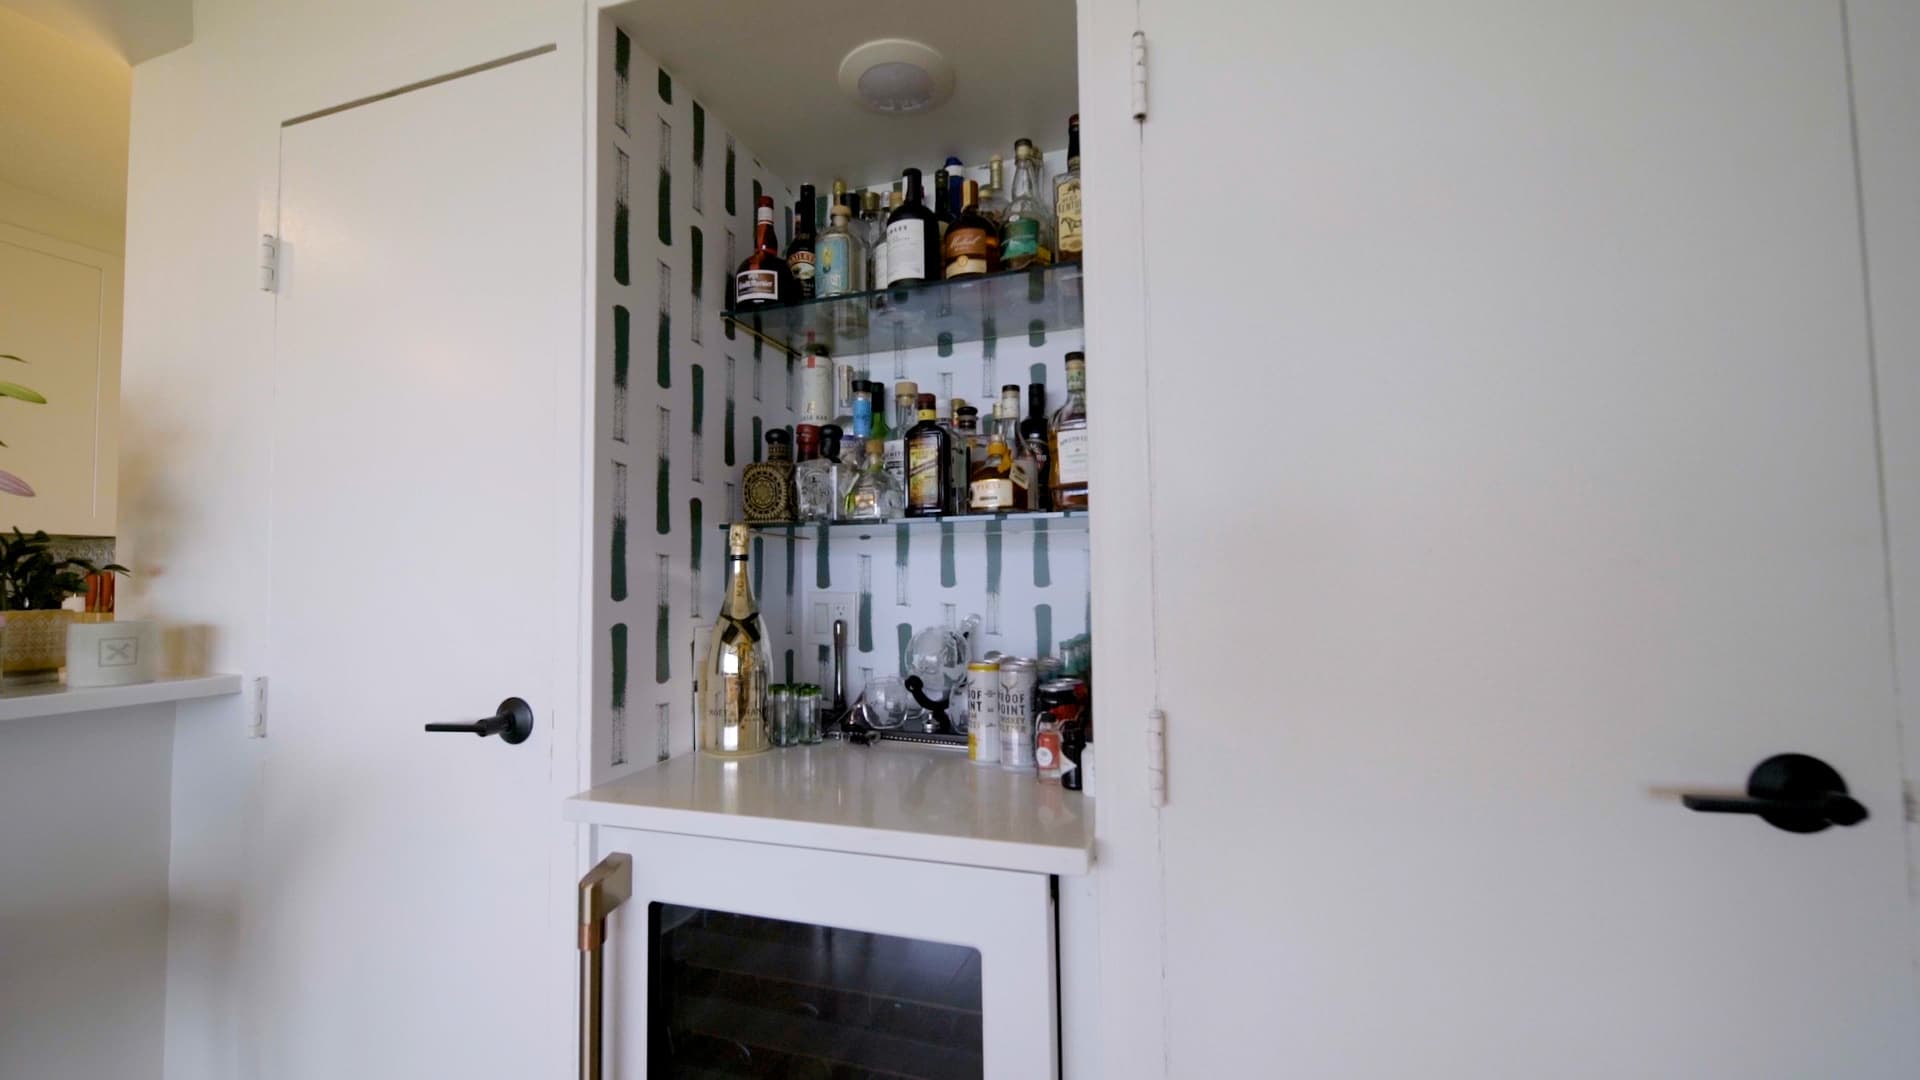 Nabongo converted a closet into a built-in bar for making cocktails at home.